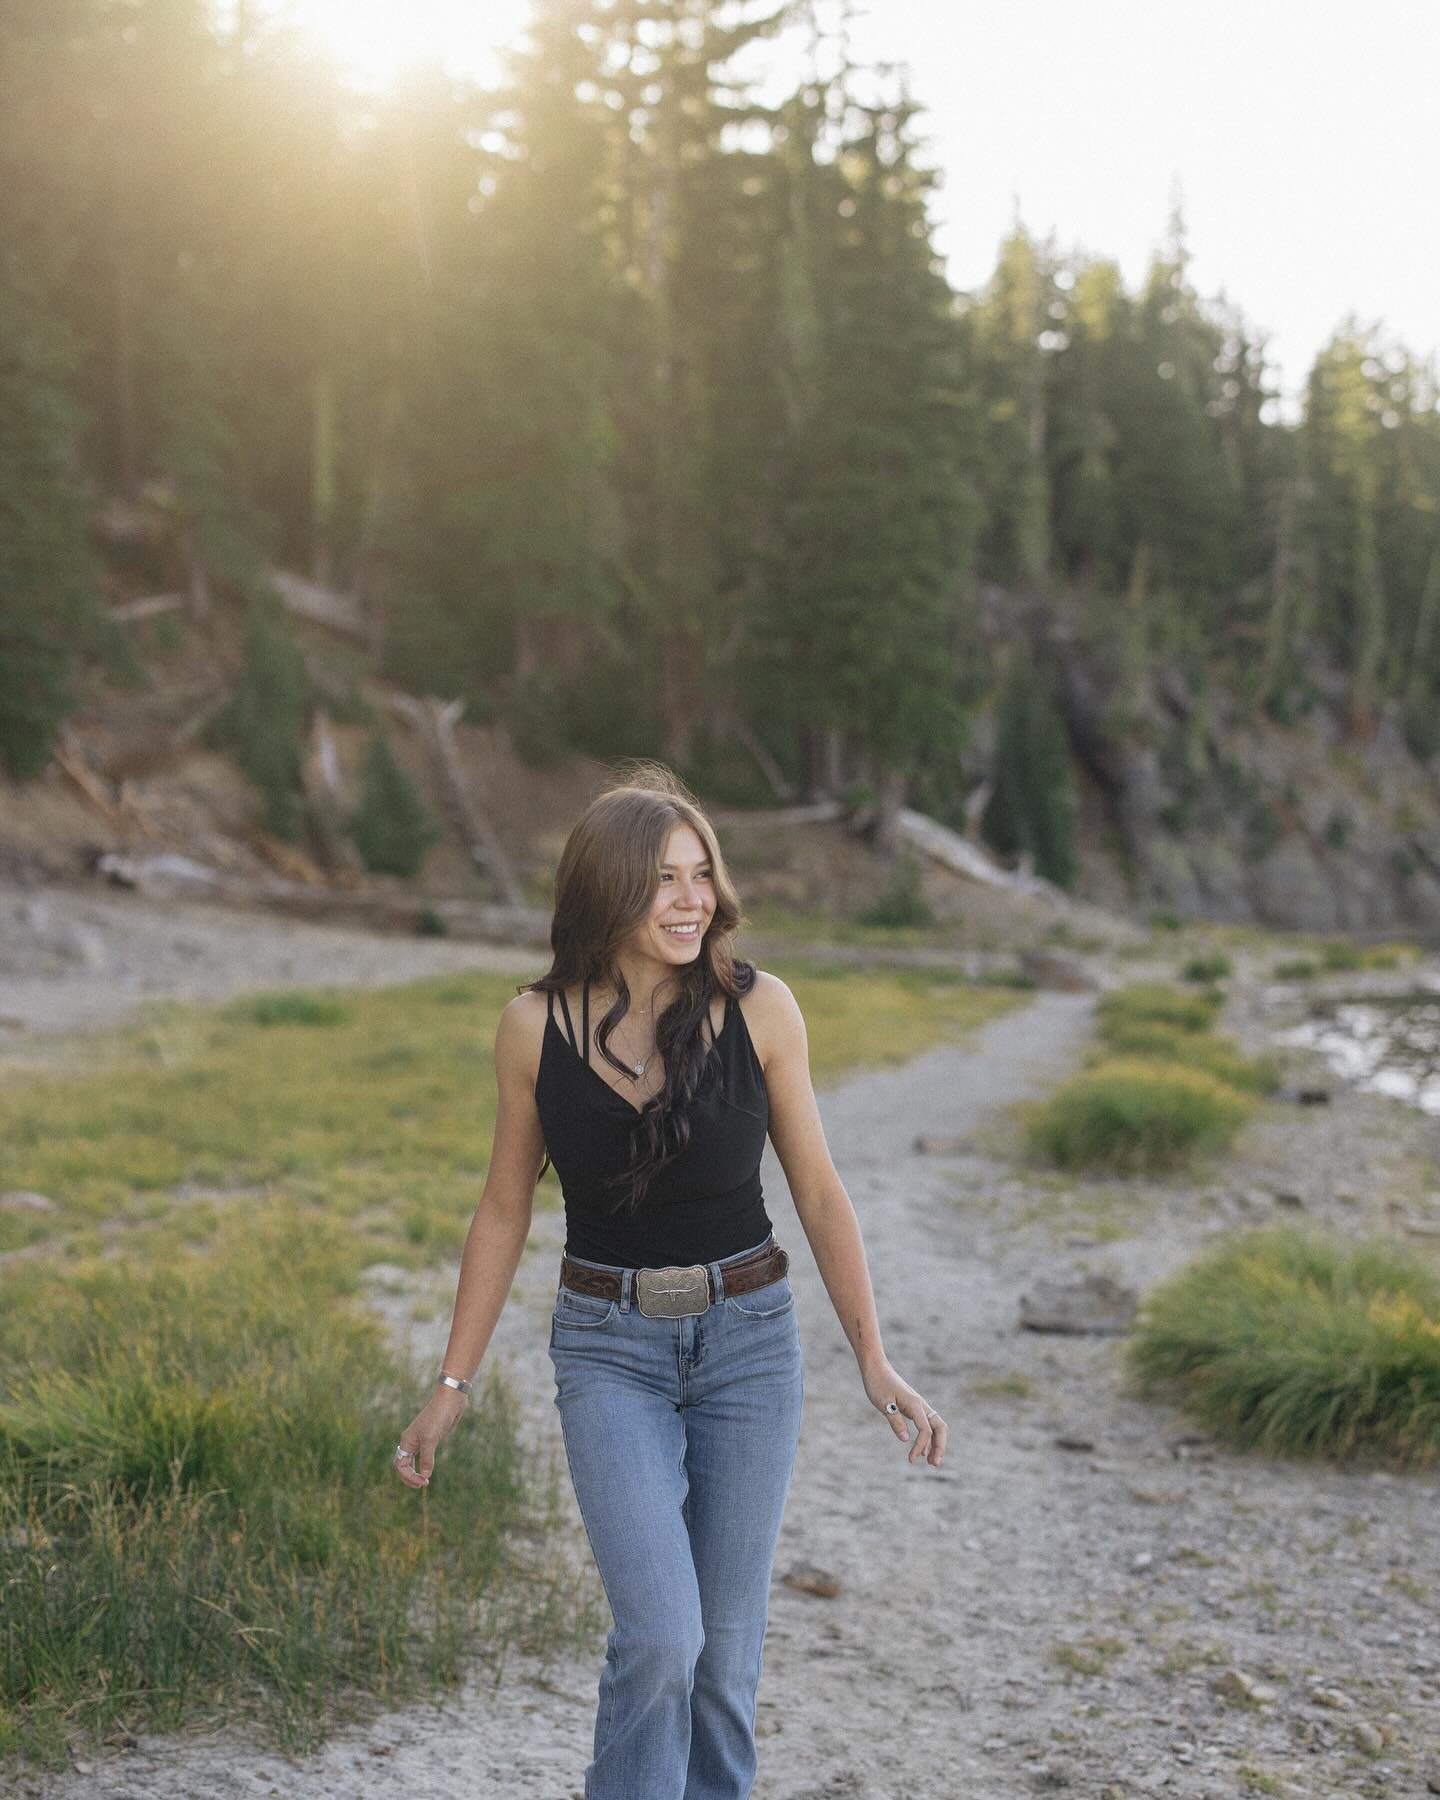 Just another reminder that I&rsquo;m gonna be in the bend area May 31 - June 2 !! Would love to do a session or two while I&rsquo;m up there. &mdash; Moments from Samantha&rsquo;s Senior session up at Three Creek Lakes in Sisters! 

-
-
-

#gabrielra